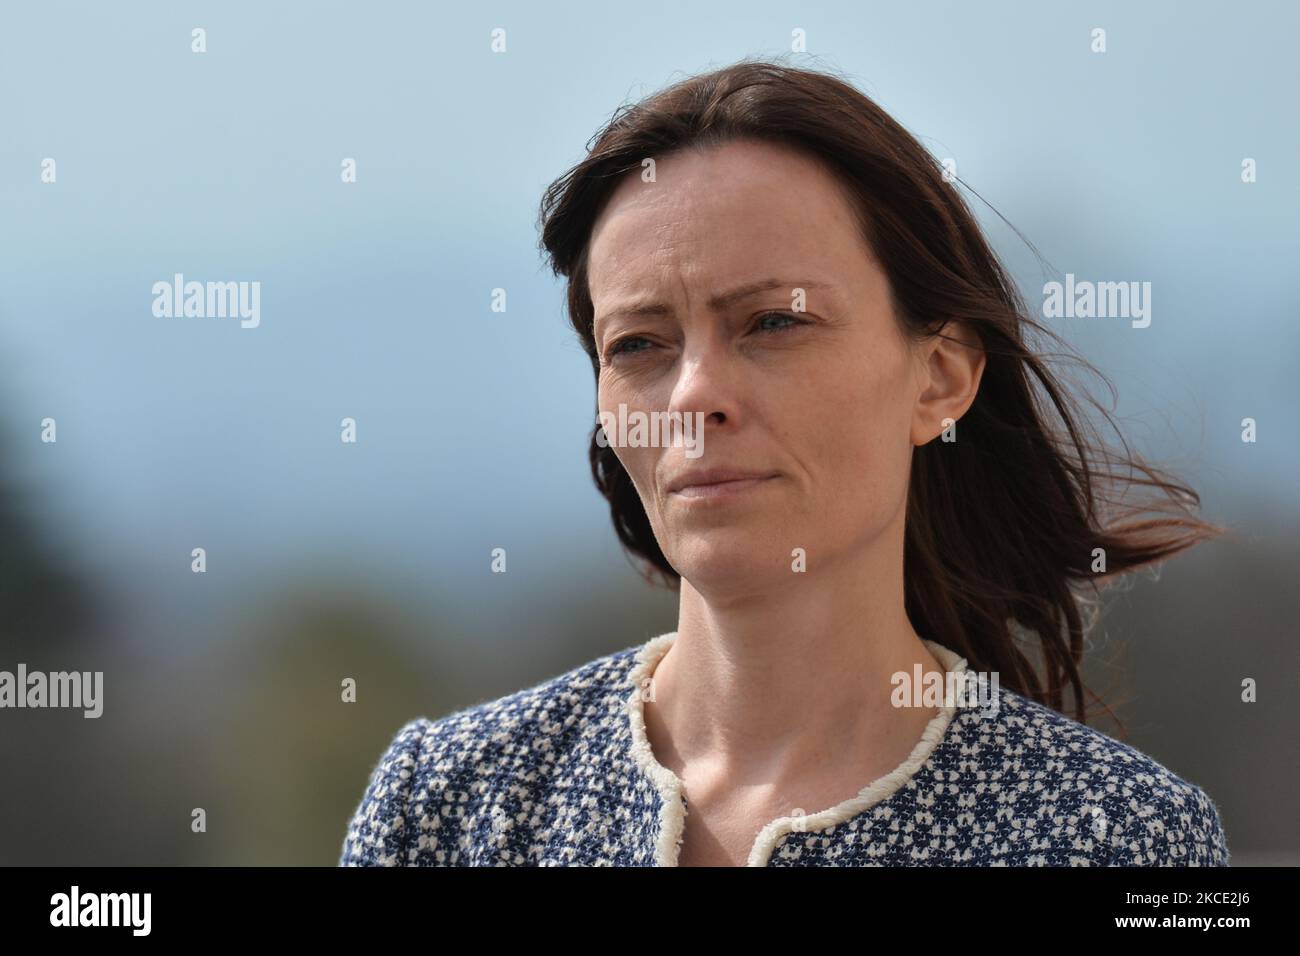 Social Democratic and Labour Party (SDLP) deputy leader Nichola Mallon seen during a press briefing outside Stormont in Belfast, following a loyalist protest in the city against Brexit's Northern Ireland Protocol. On Monday, April 19, 2021, in Belfast, Northern Ireland (Photo by Artur Widak/NurPhoto) Stock Photo